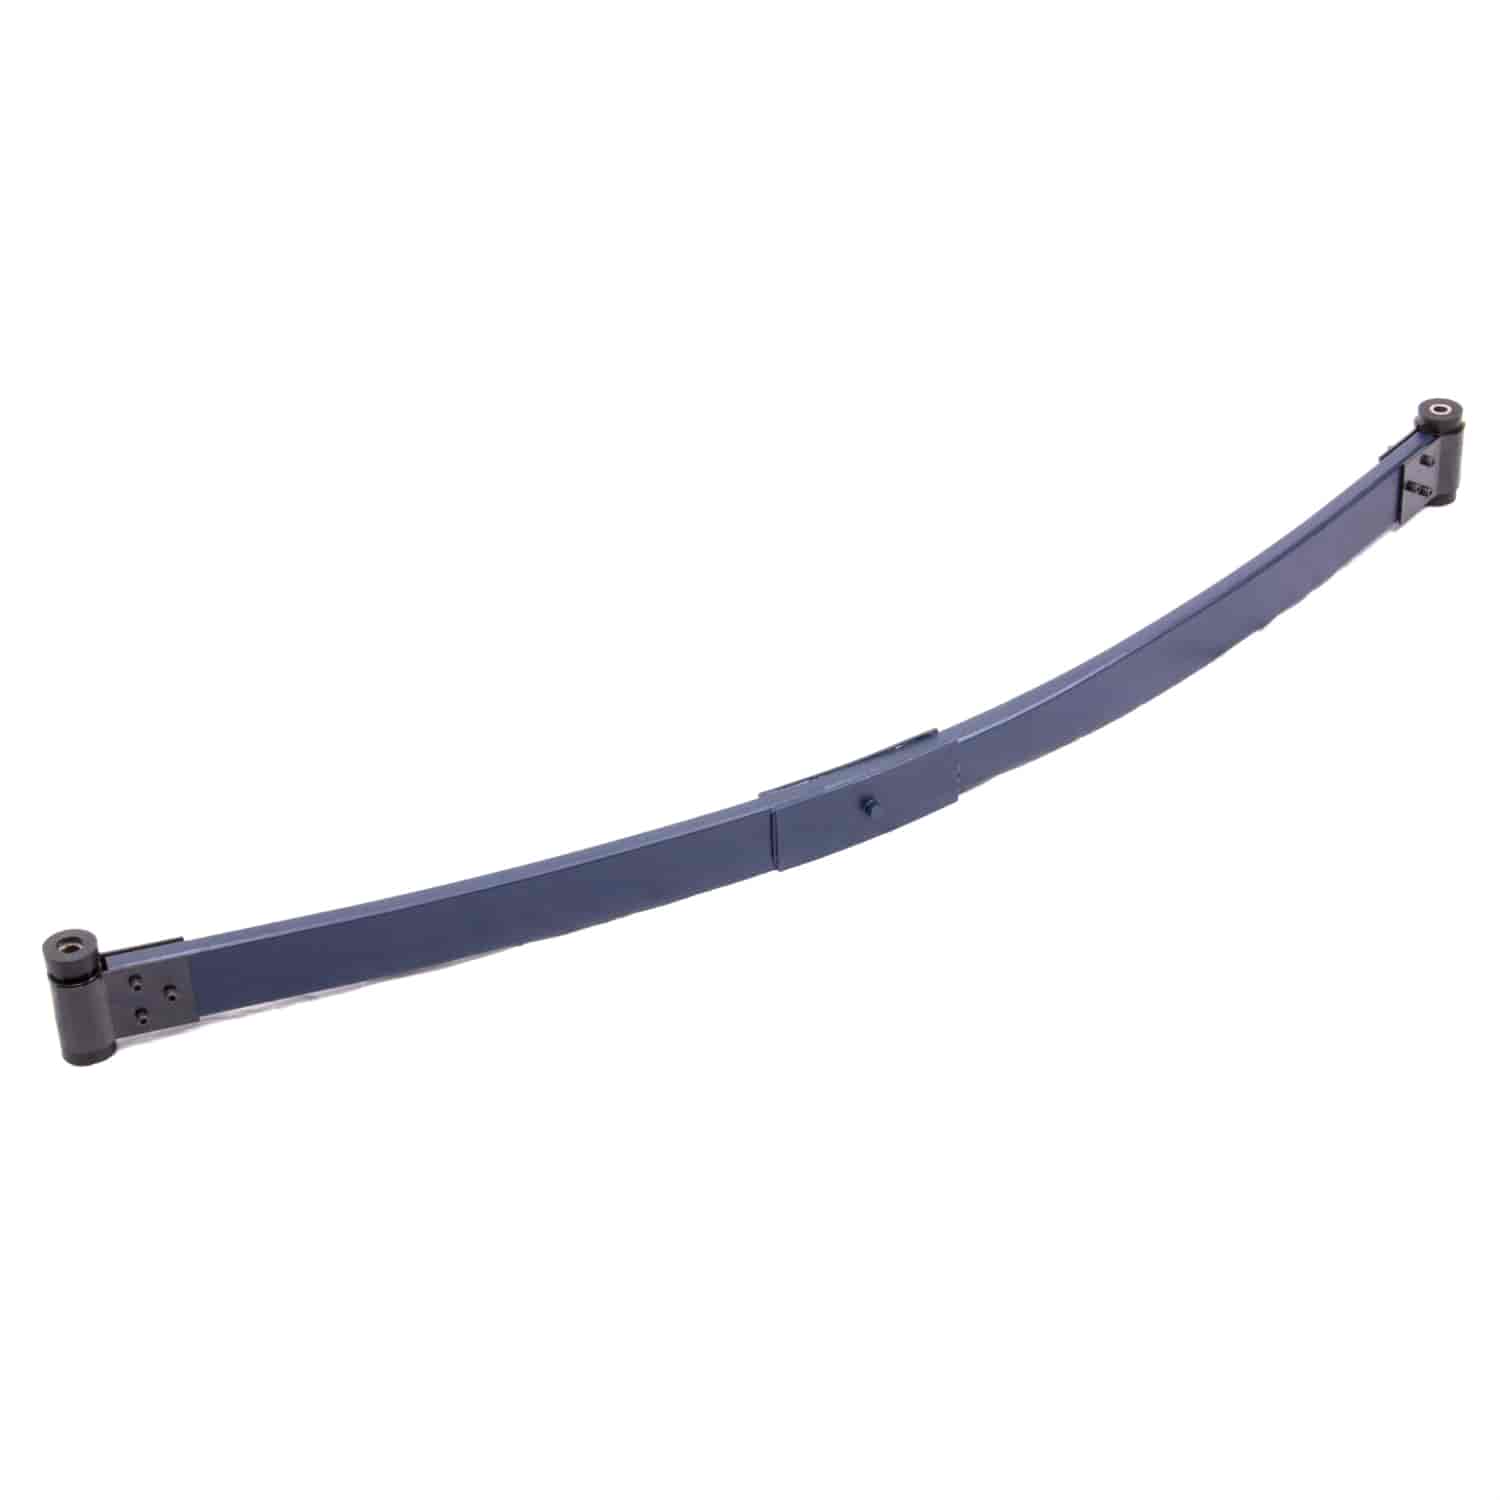 Composite Leaf Spring GM Style - 150 lbs.